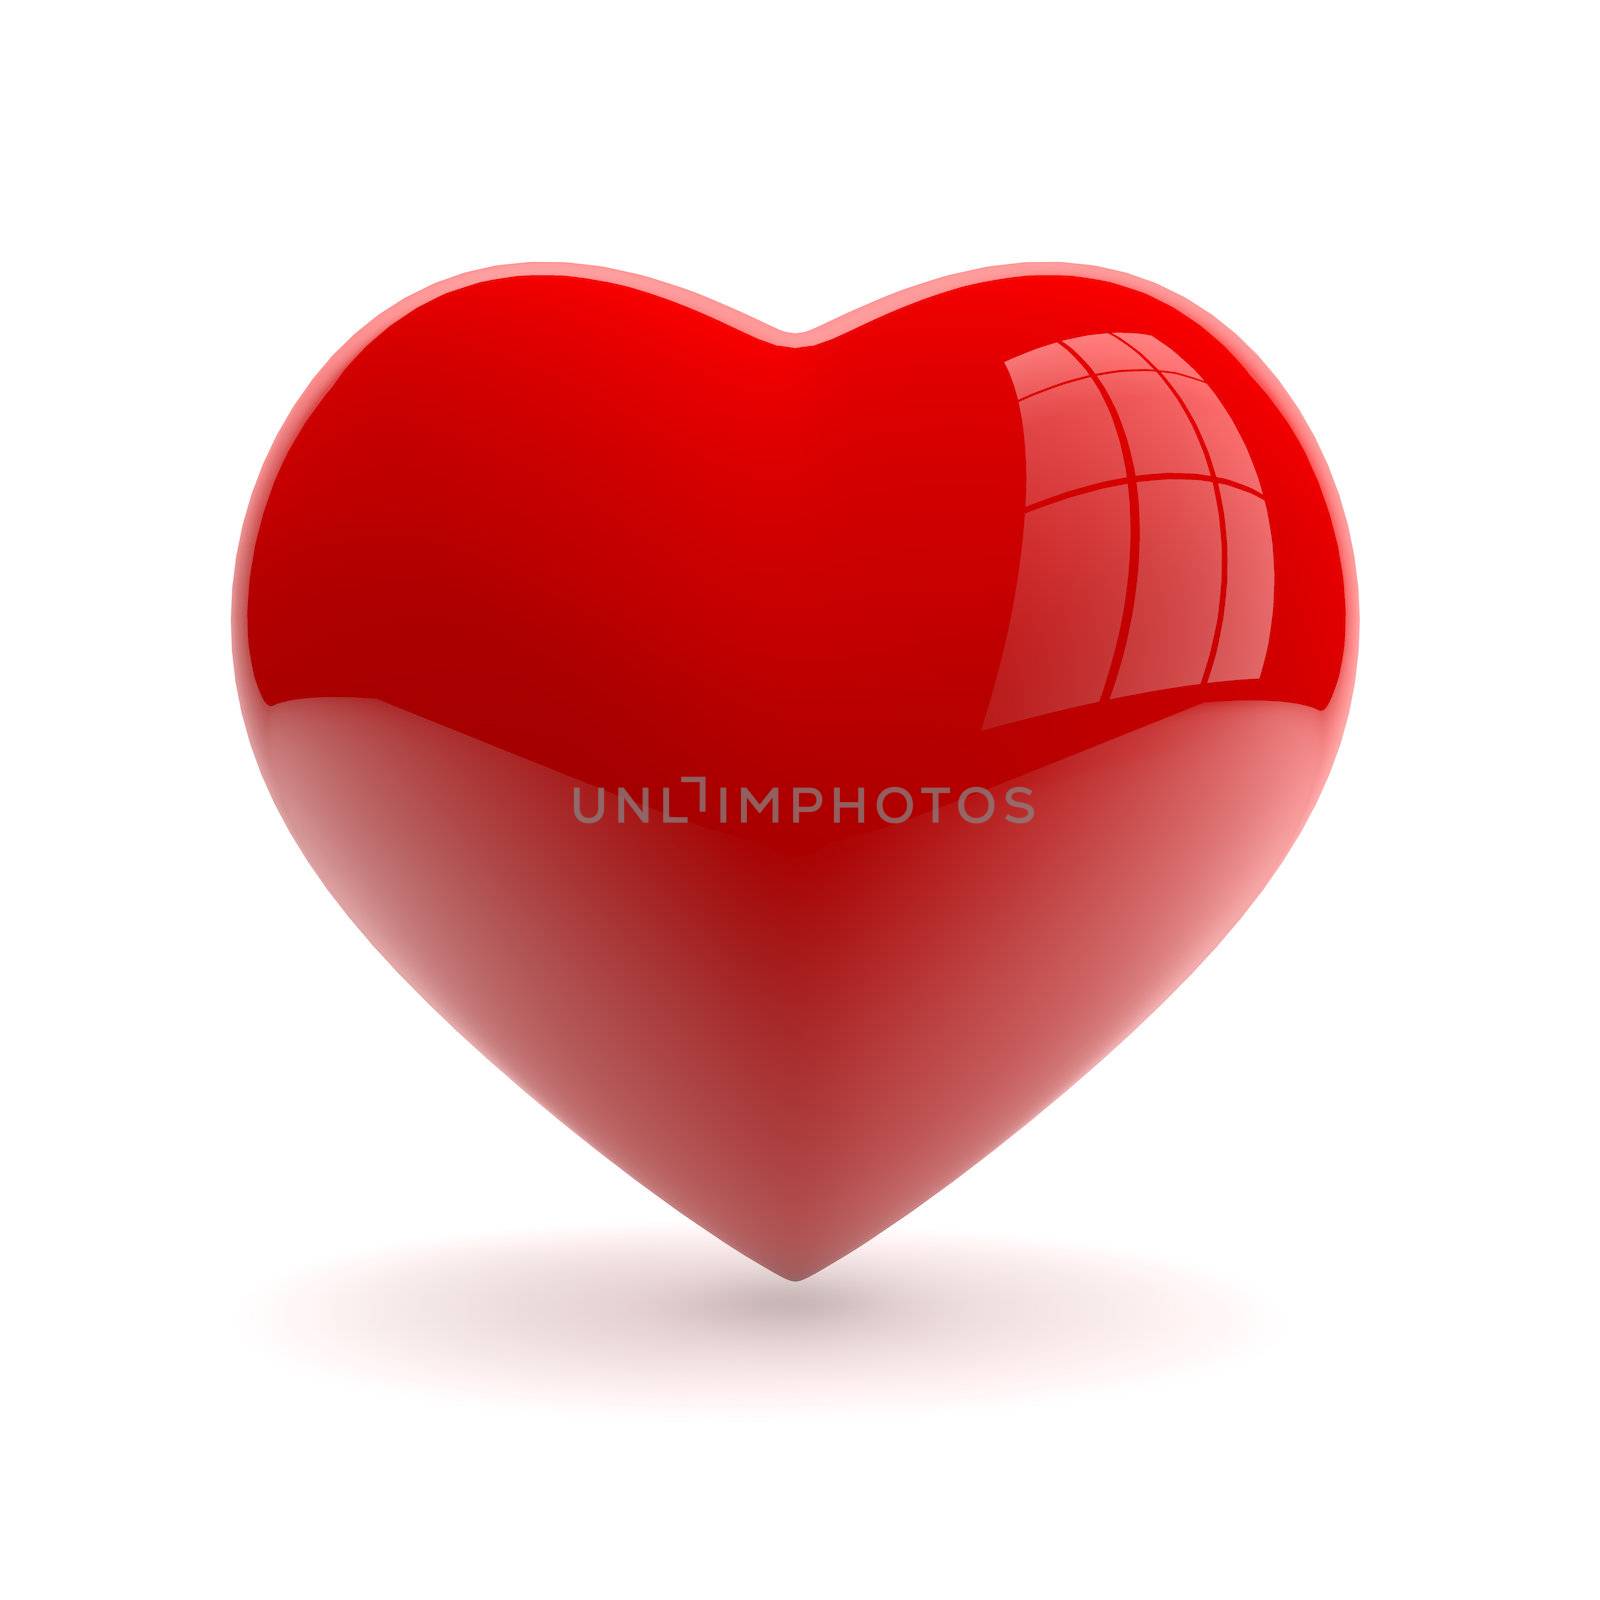 Red heart isolaed on white background